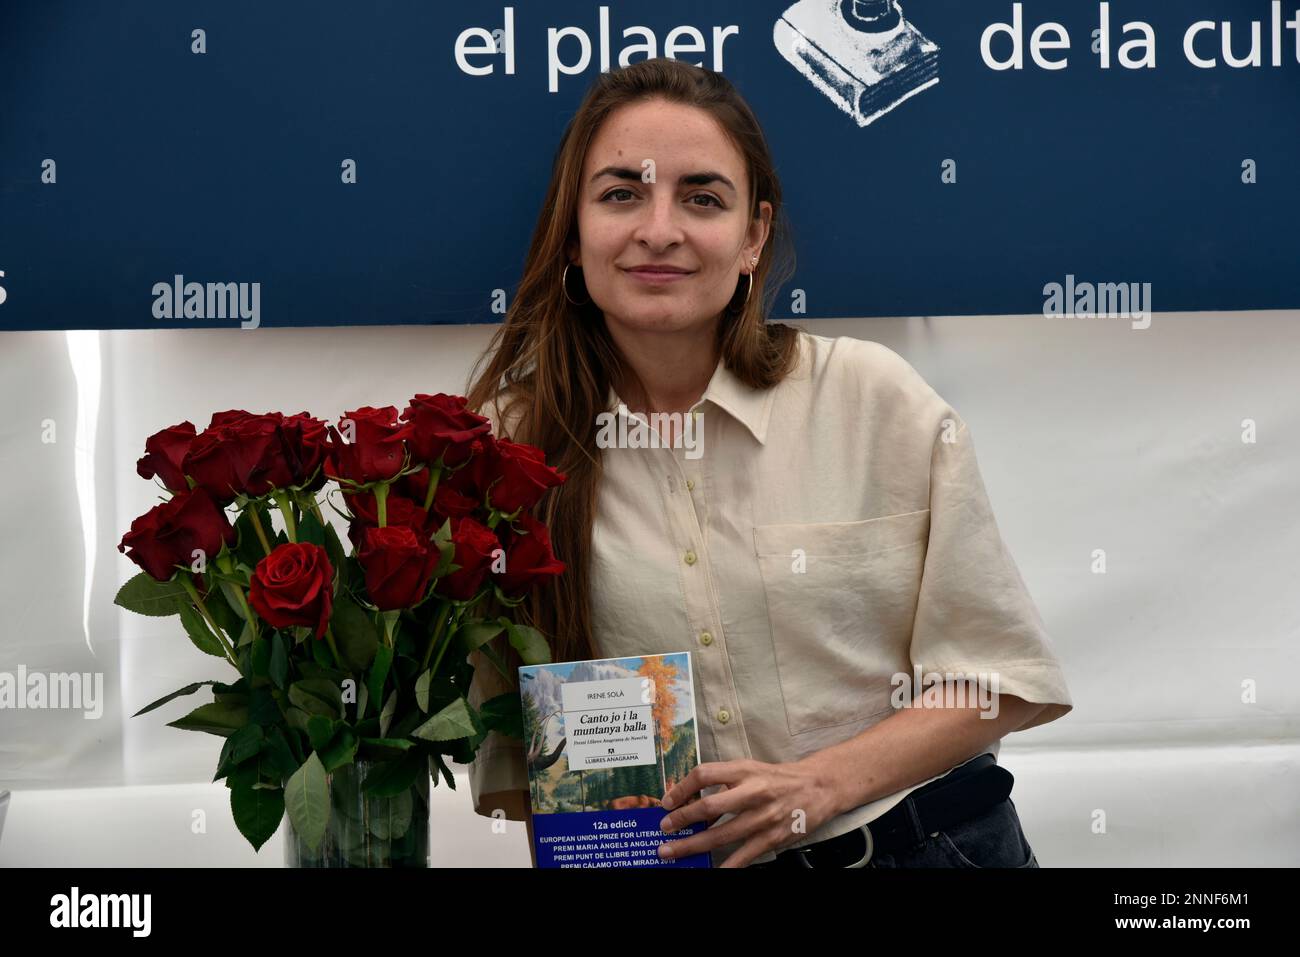 The author Irene Solá with a bouquet of red roses and her book at the book  signing on Sant Jordi's Day, April 23rd, 2021, in Barcelona, Catalonia  (Spain). Although there will be